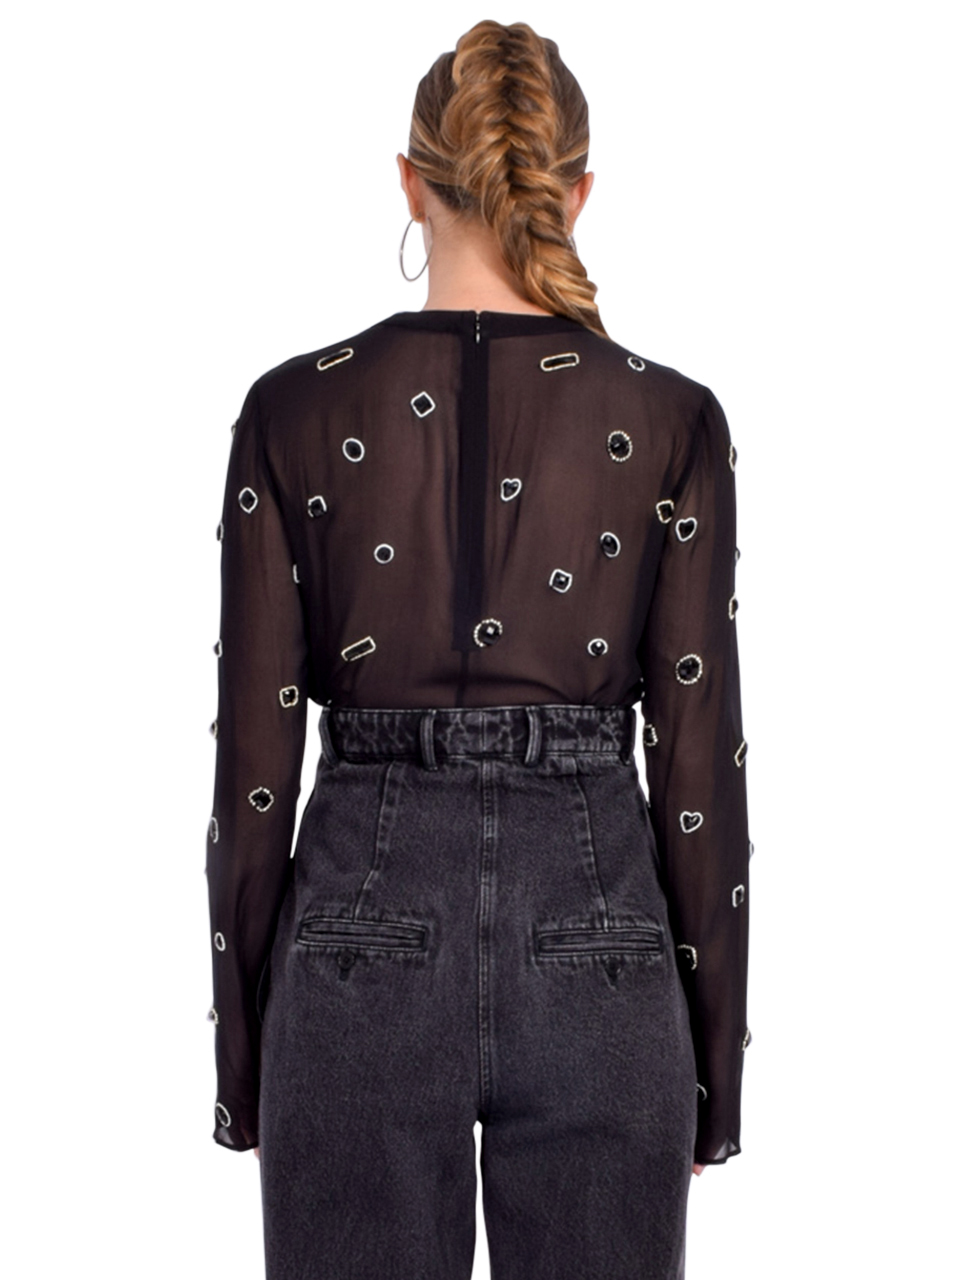 3.1 Phillip Lim Halo Embroidered Chiffon Long Sleeve Top in Black Back View 